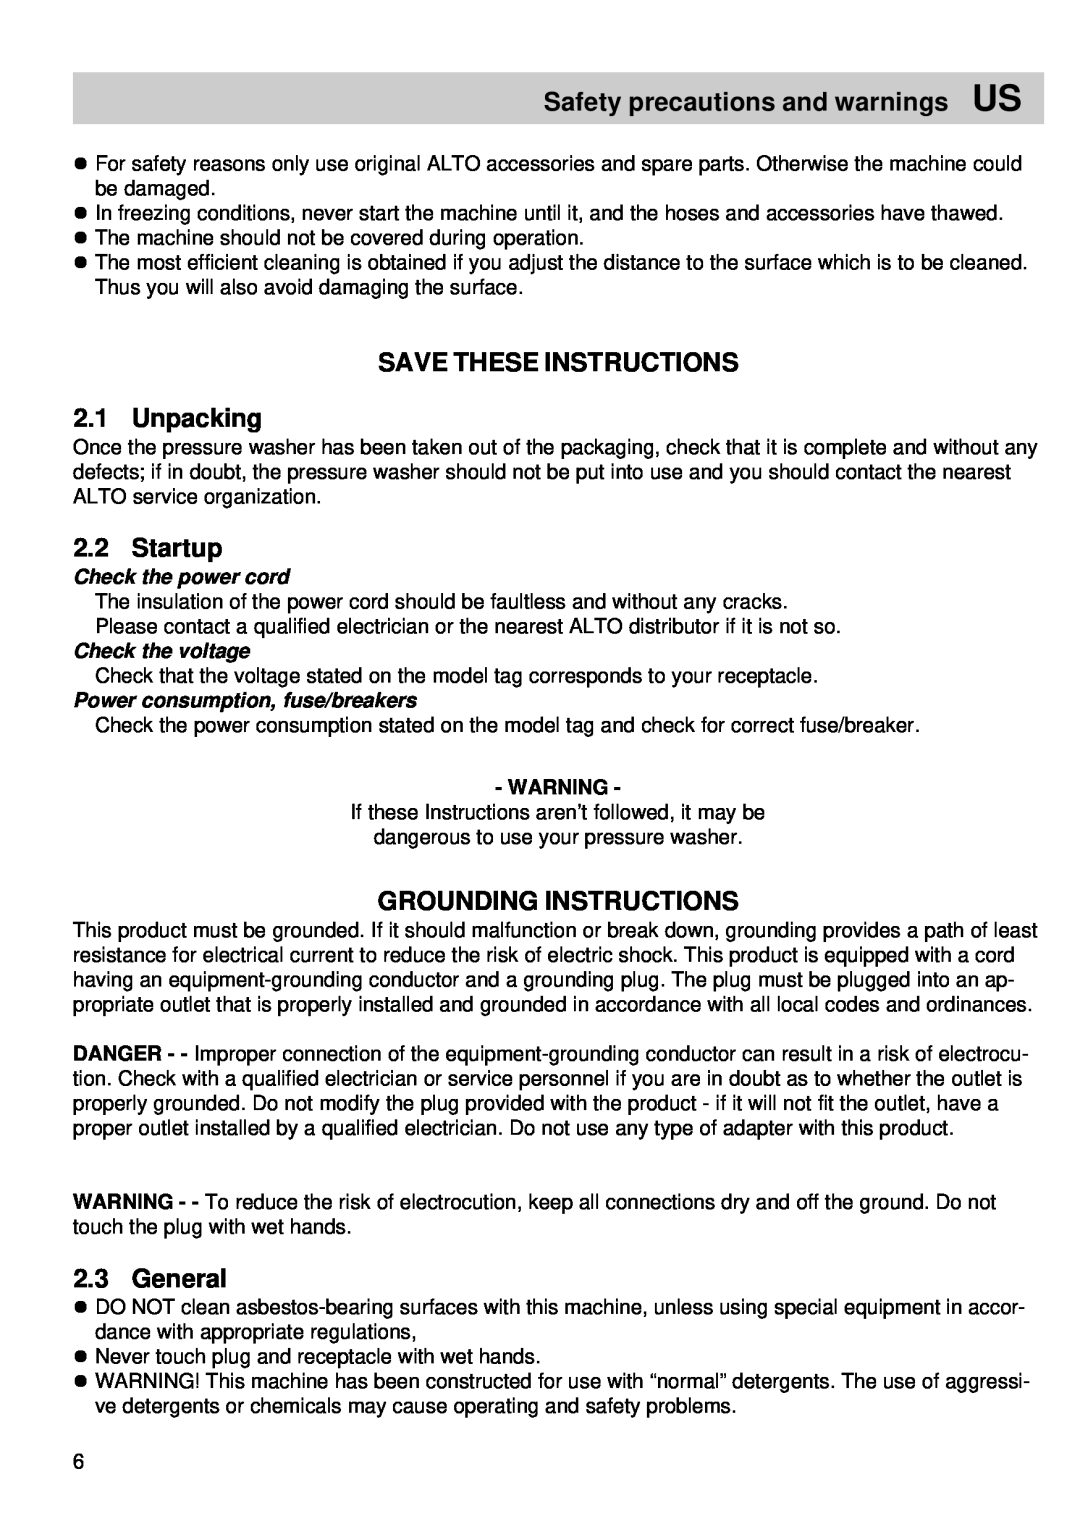 Alto-Shaam 52C3KSA -2 manual Safety precautions and warnings US, SAVE THESE INSTRUCTIONS 2.1 Unpacking, Startup, General 